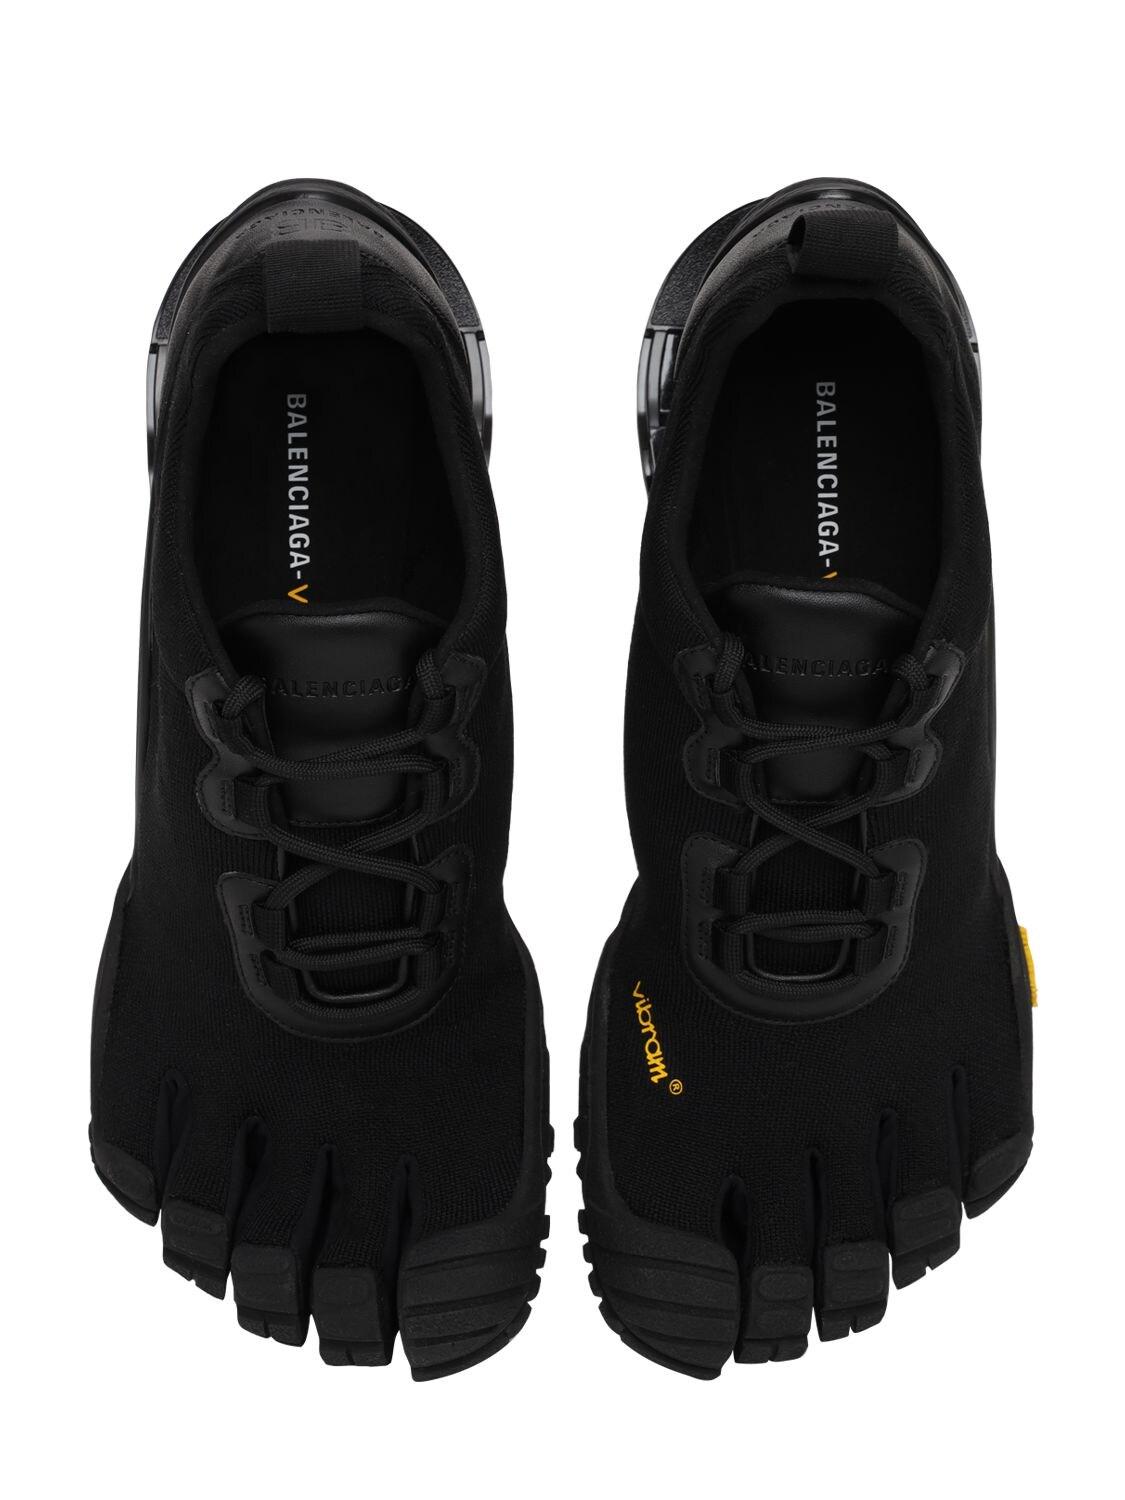 Balenciaga Synthetic Vibram Toe Low-top Sneakers in Black for Men - Lyst